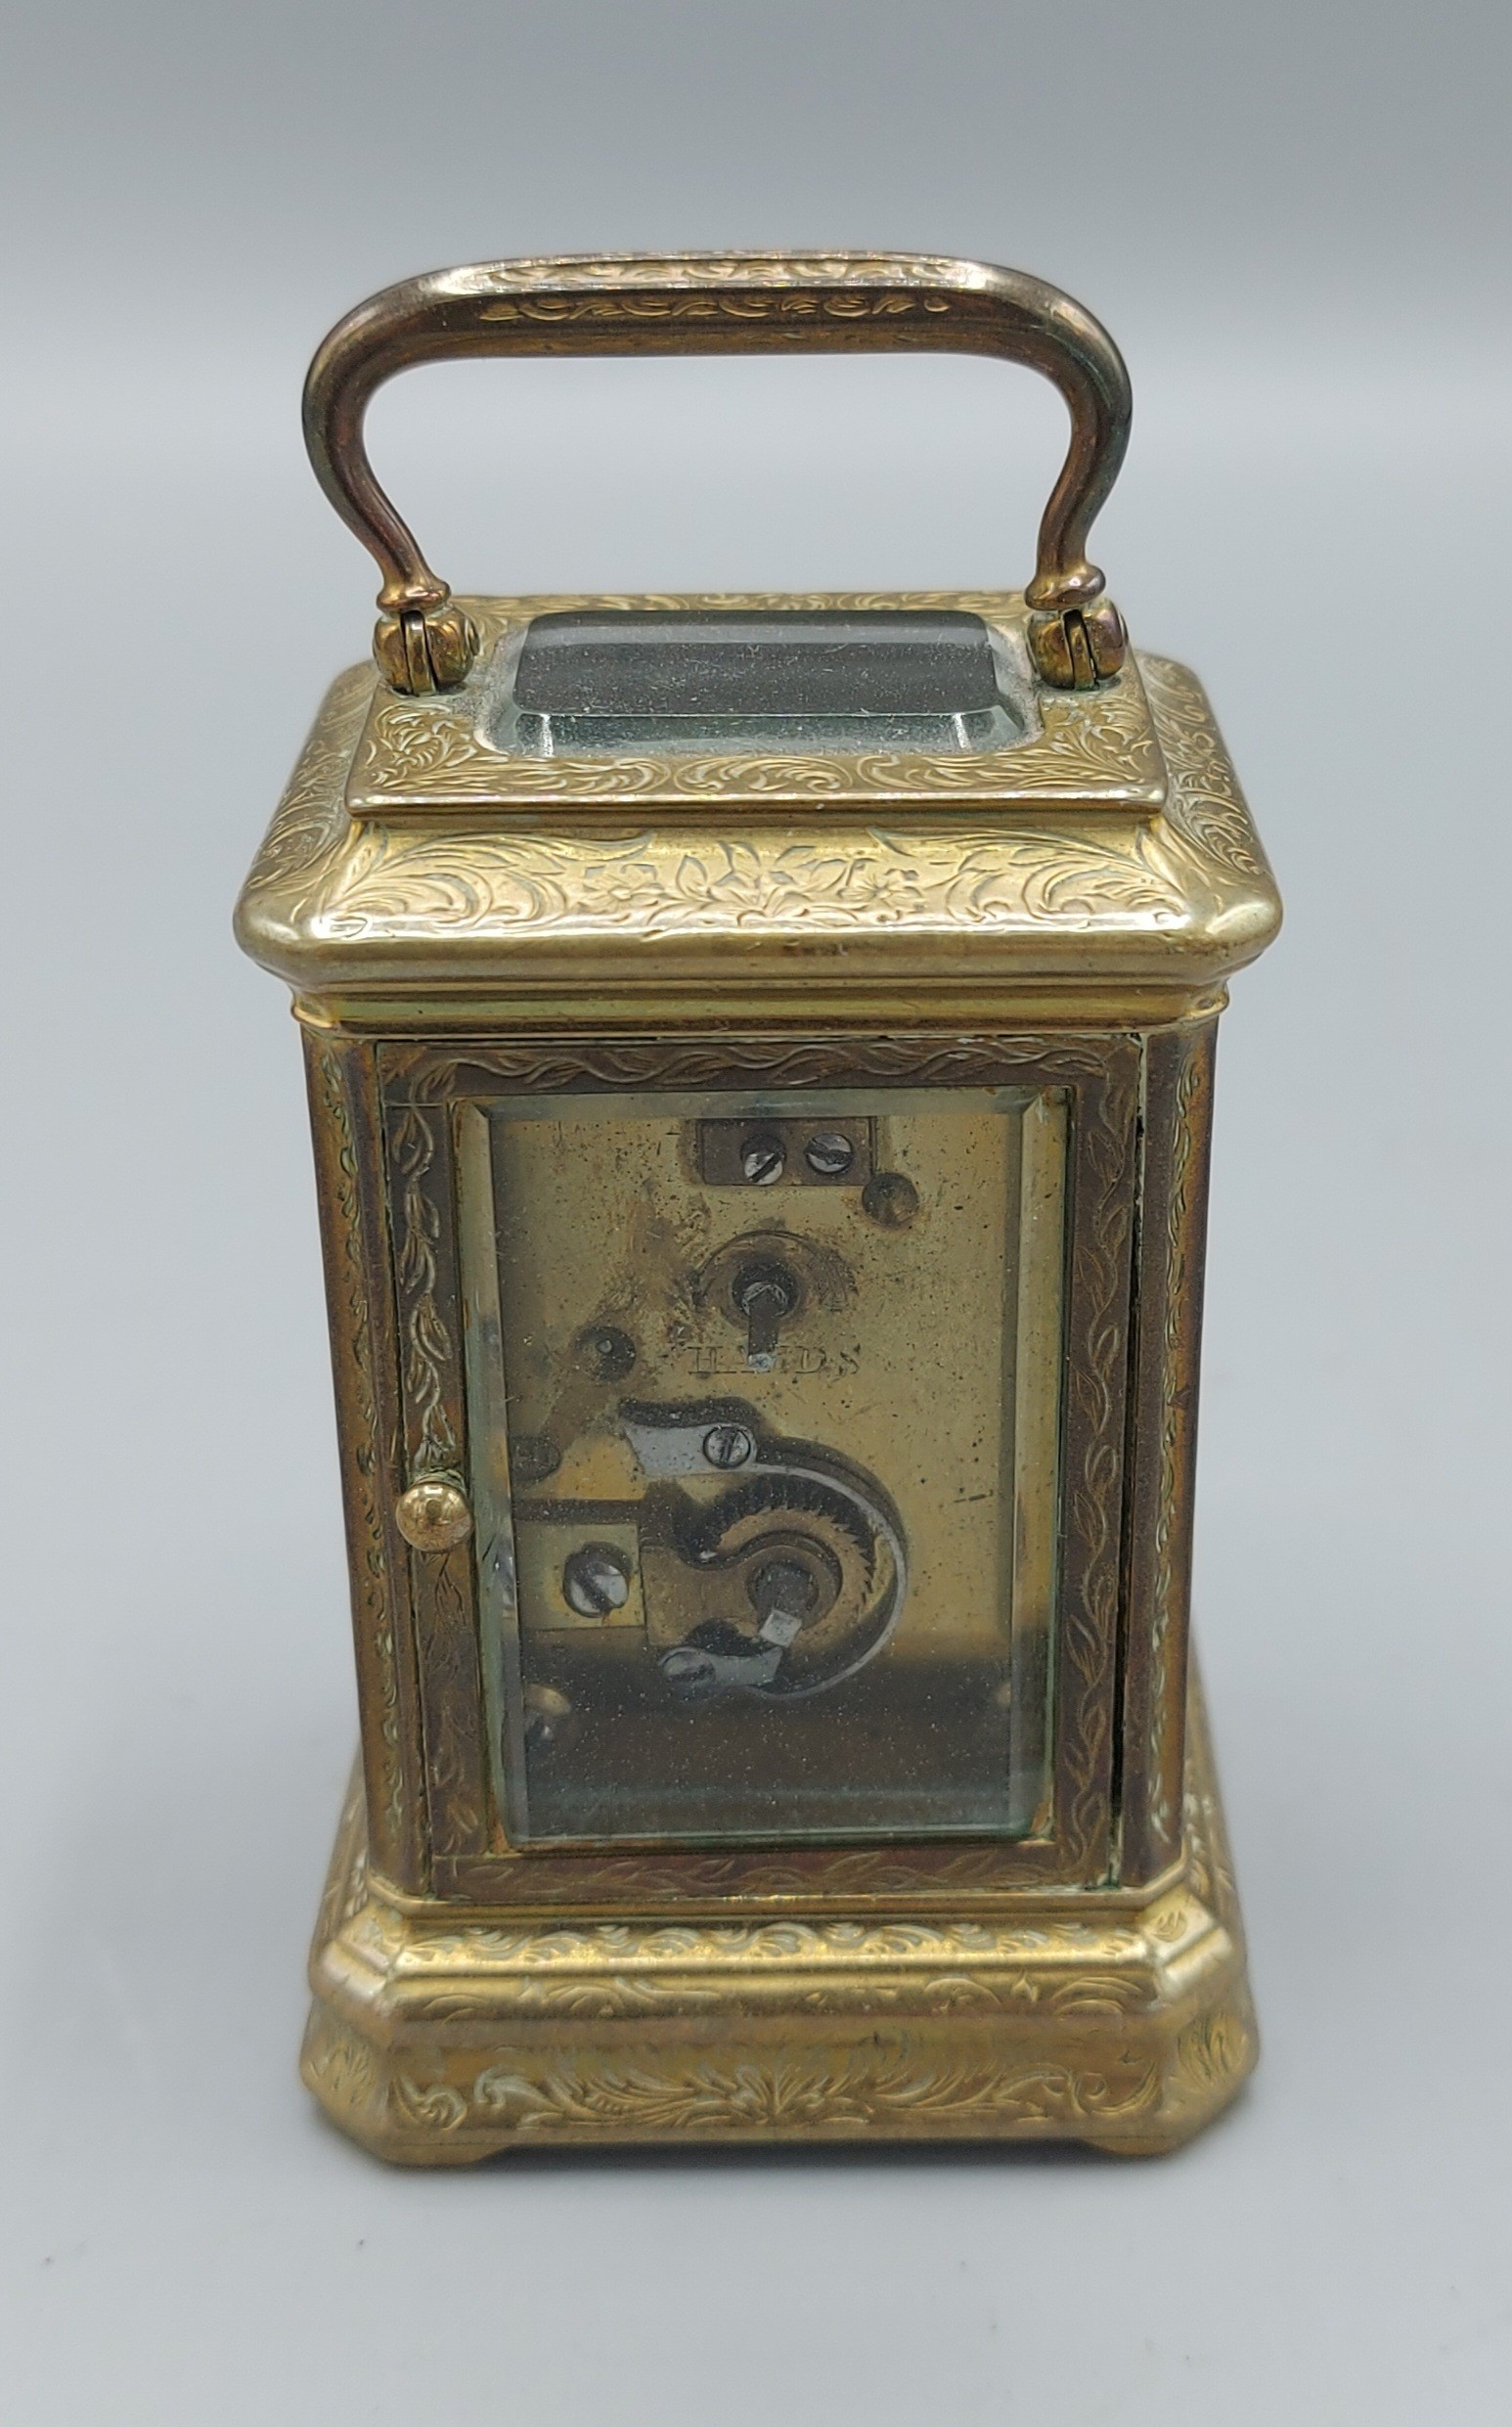 A French brass cased miniature Carriage clock with porcelain panels, lever escapement and carrying - Image 3 of 3